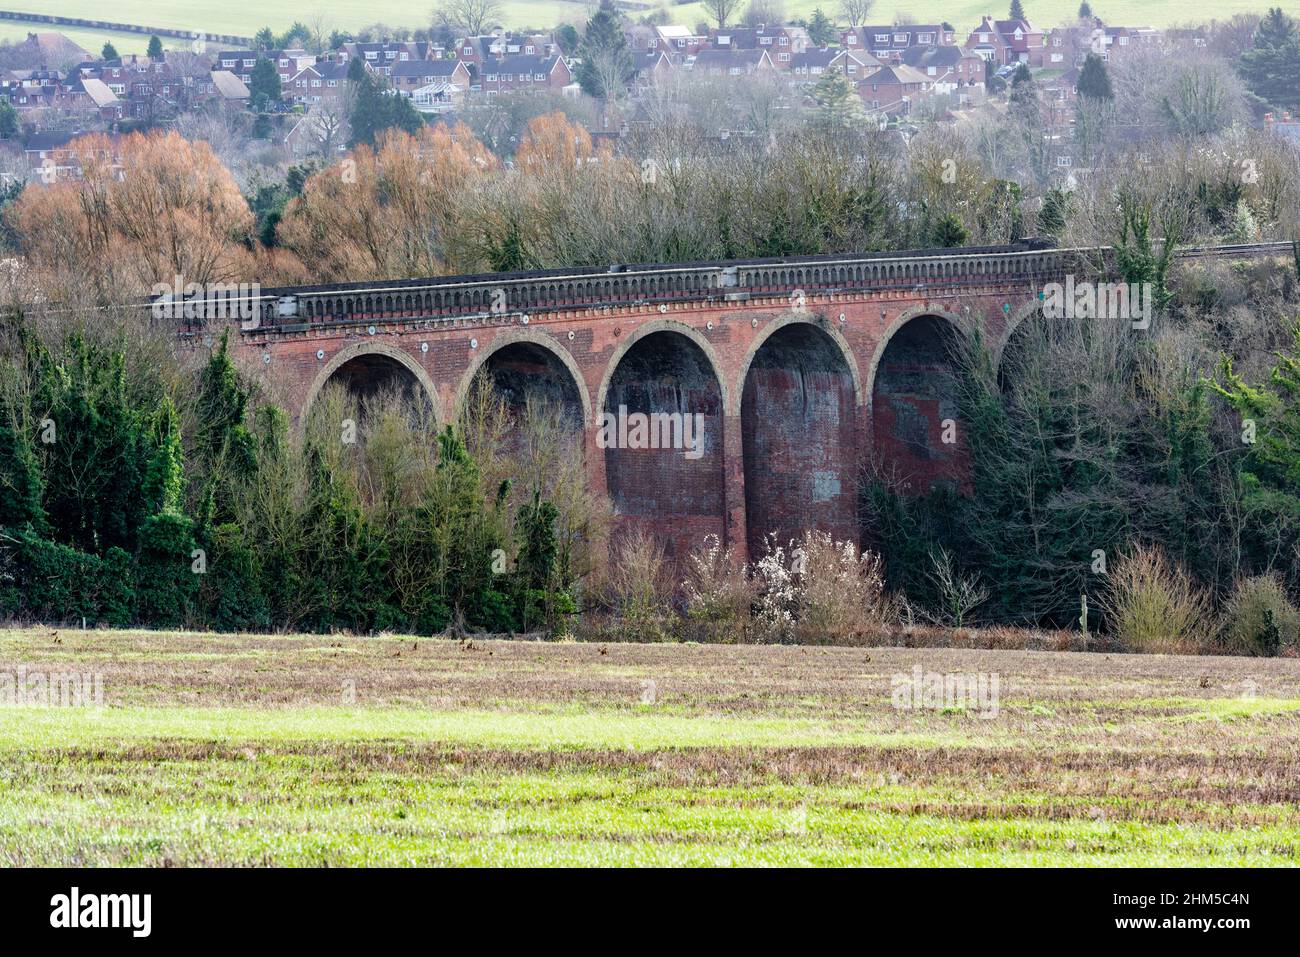 The village of Eynsford near Dartford in Kent and its railway viaduct built in 1860 Stock Photo